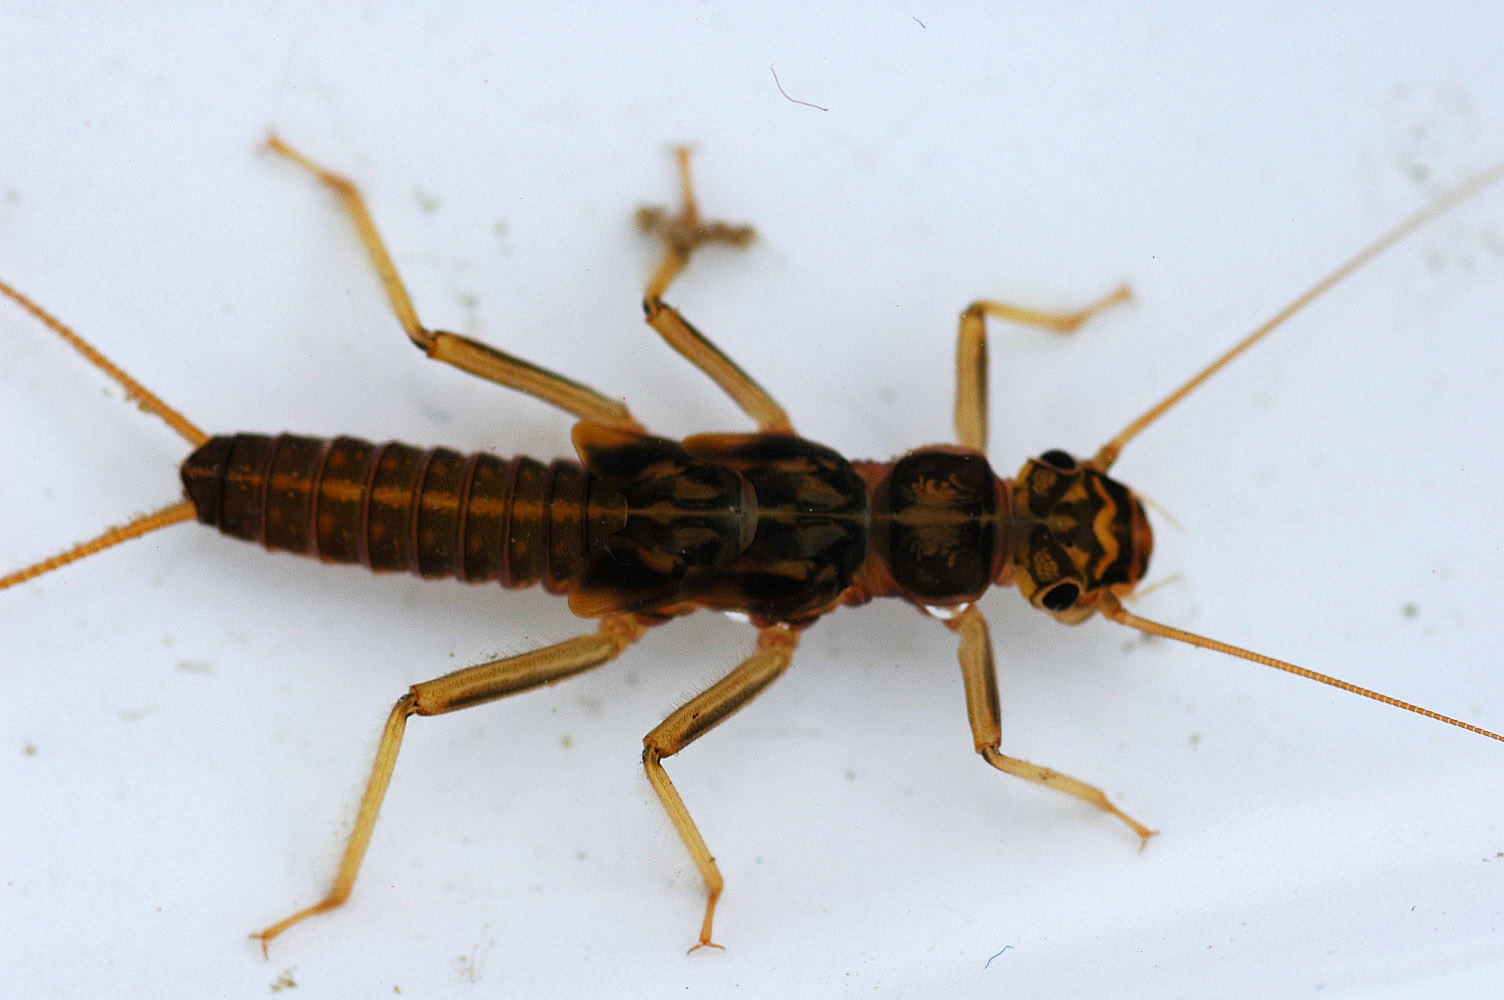 Skwala (Large Springflies) Stonefly Nymph from the Jocko River in Montana